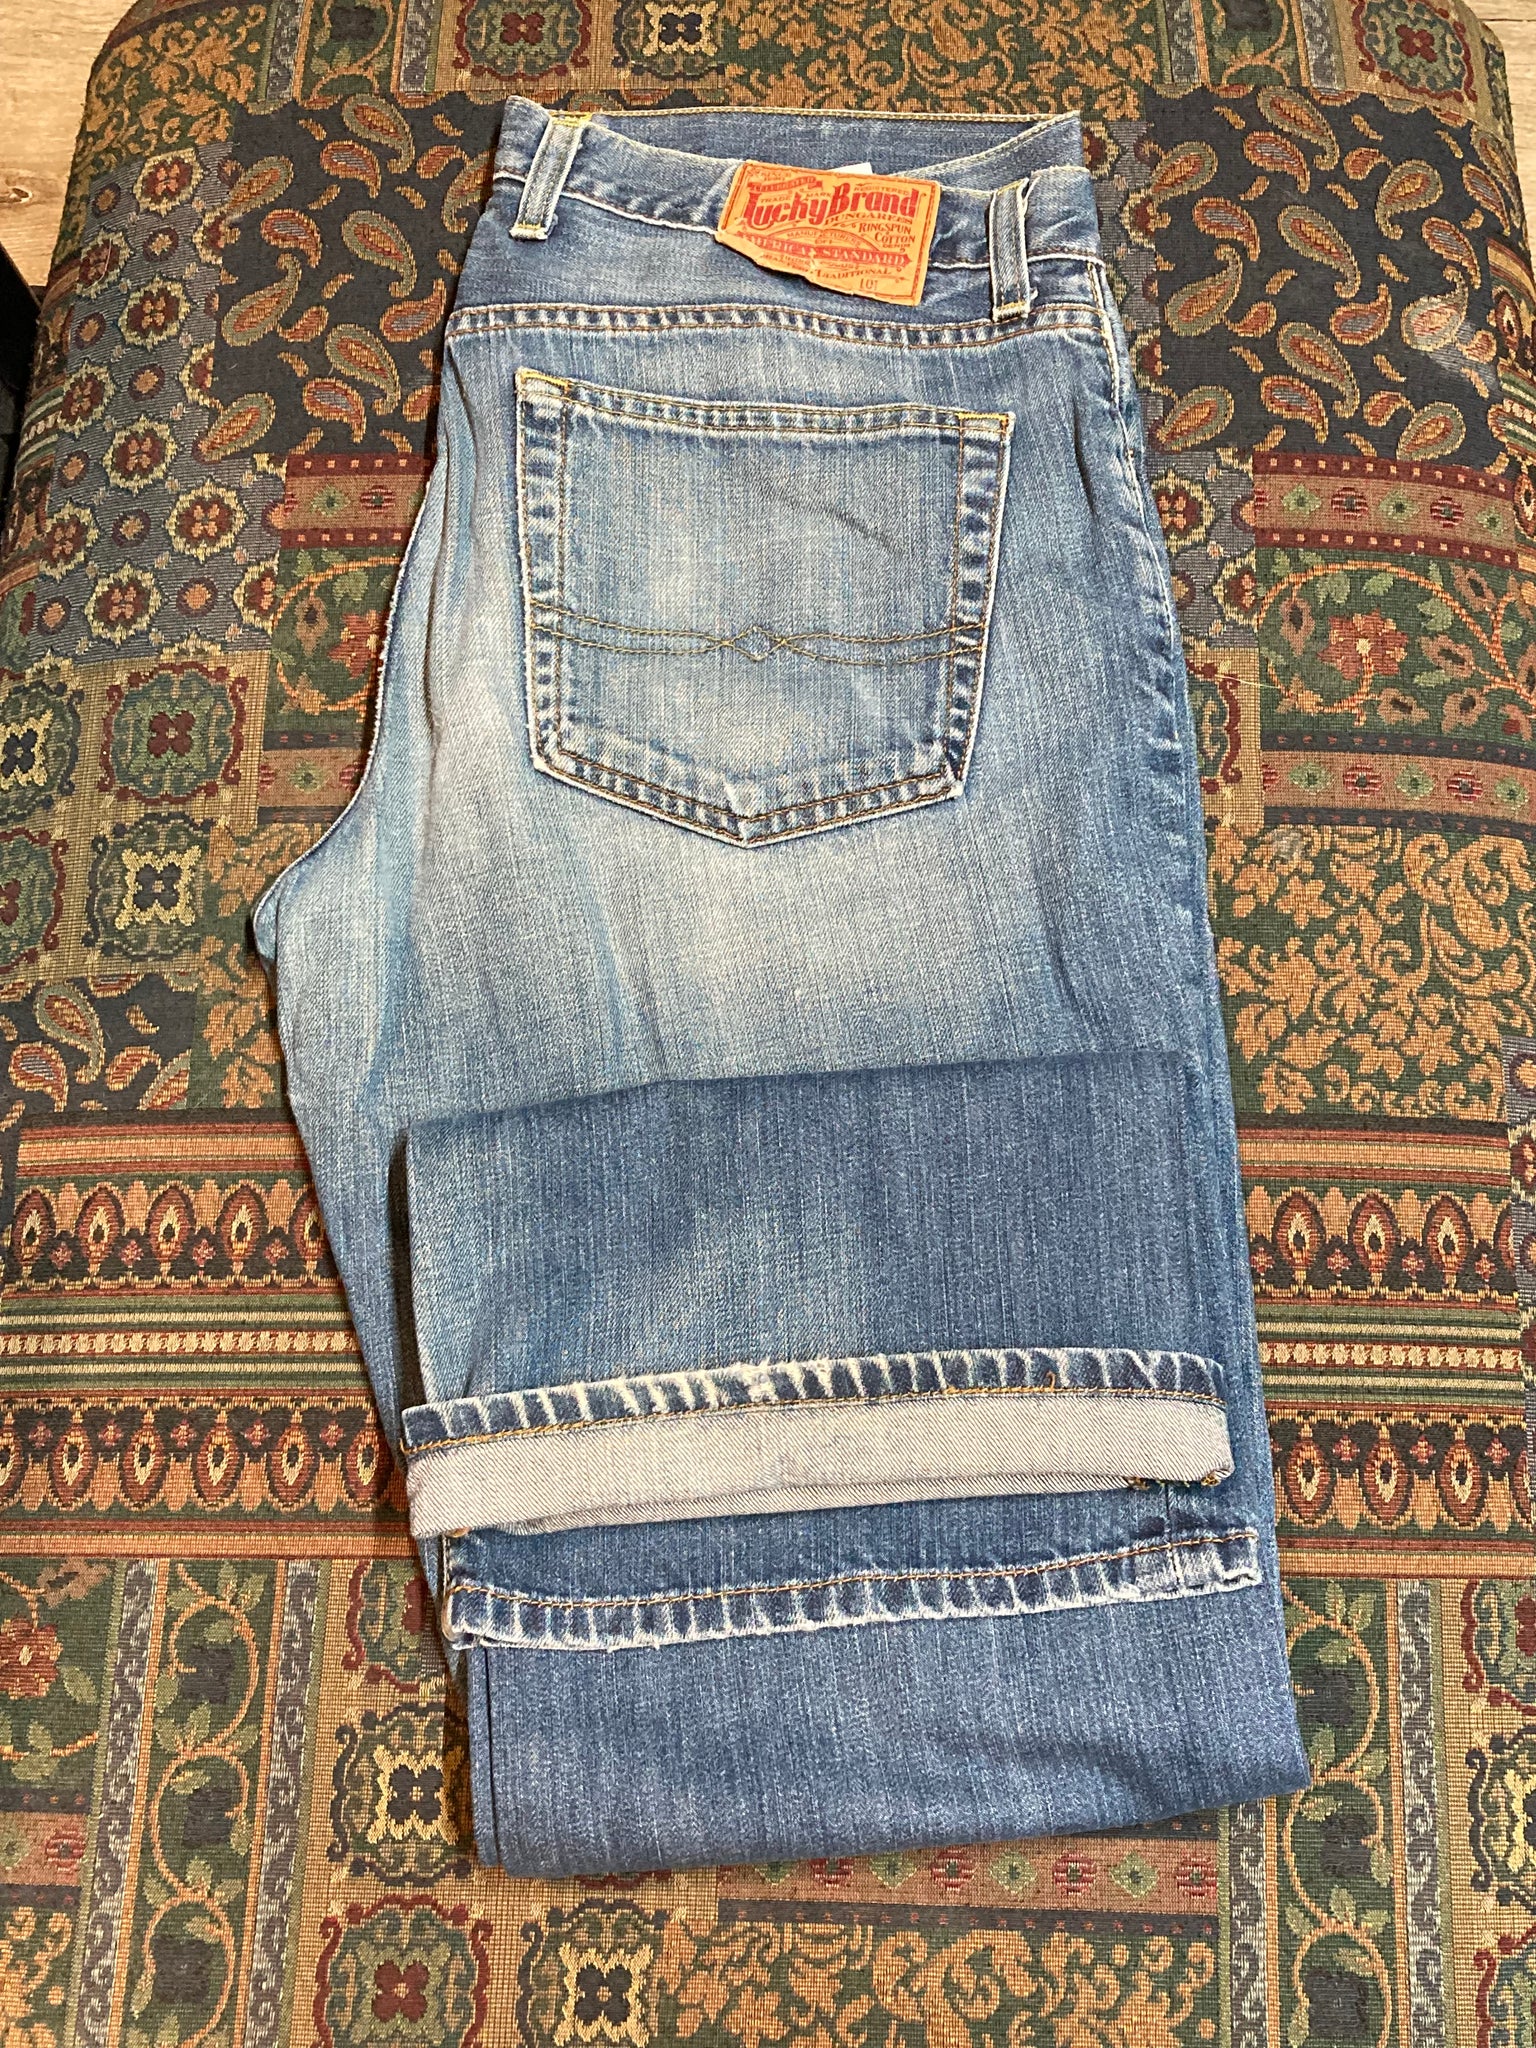 Vintage Lucky Brand Denim Jeans, Slim Bootcut - 35”x31”, Made in